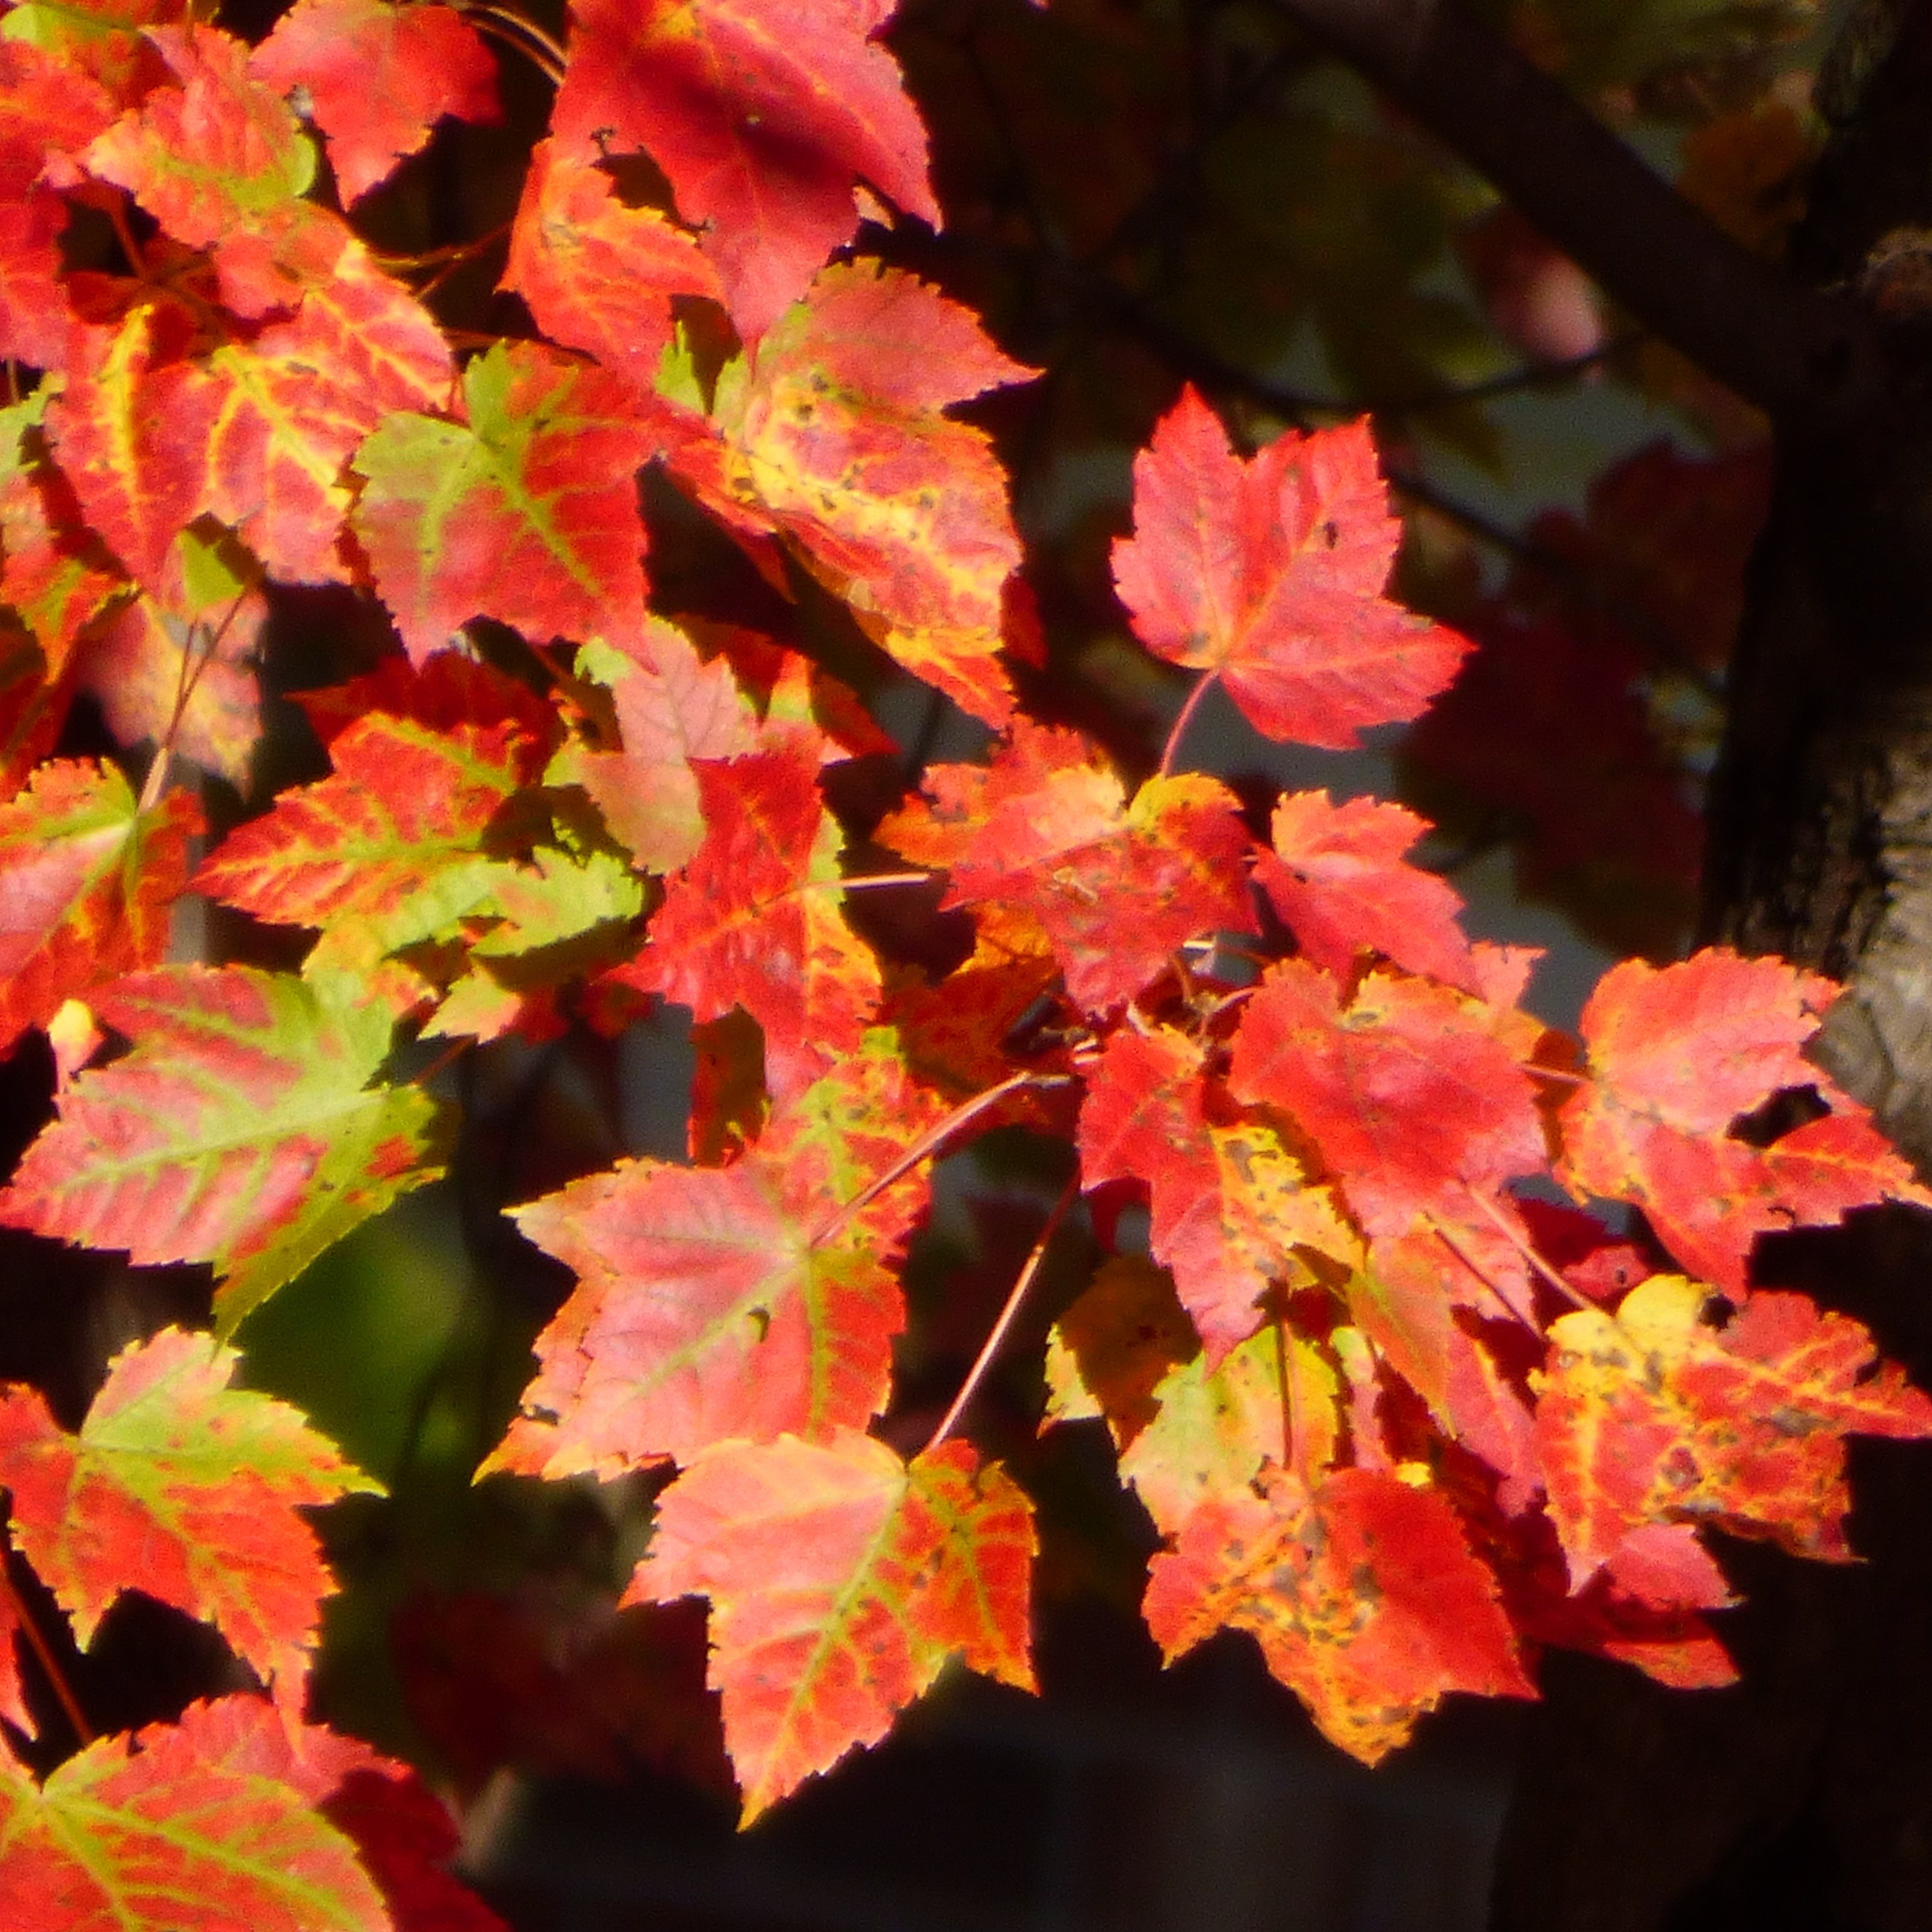 Red Colored Tree Leaves ? Types Of Trees That Turn Red In Autumn